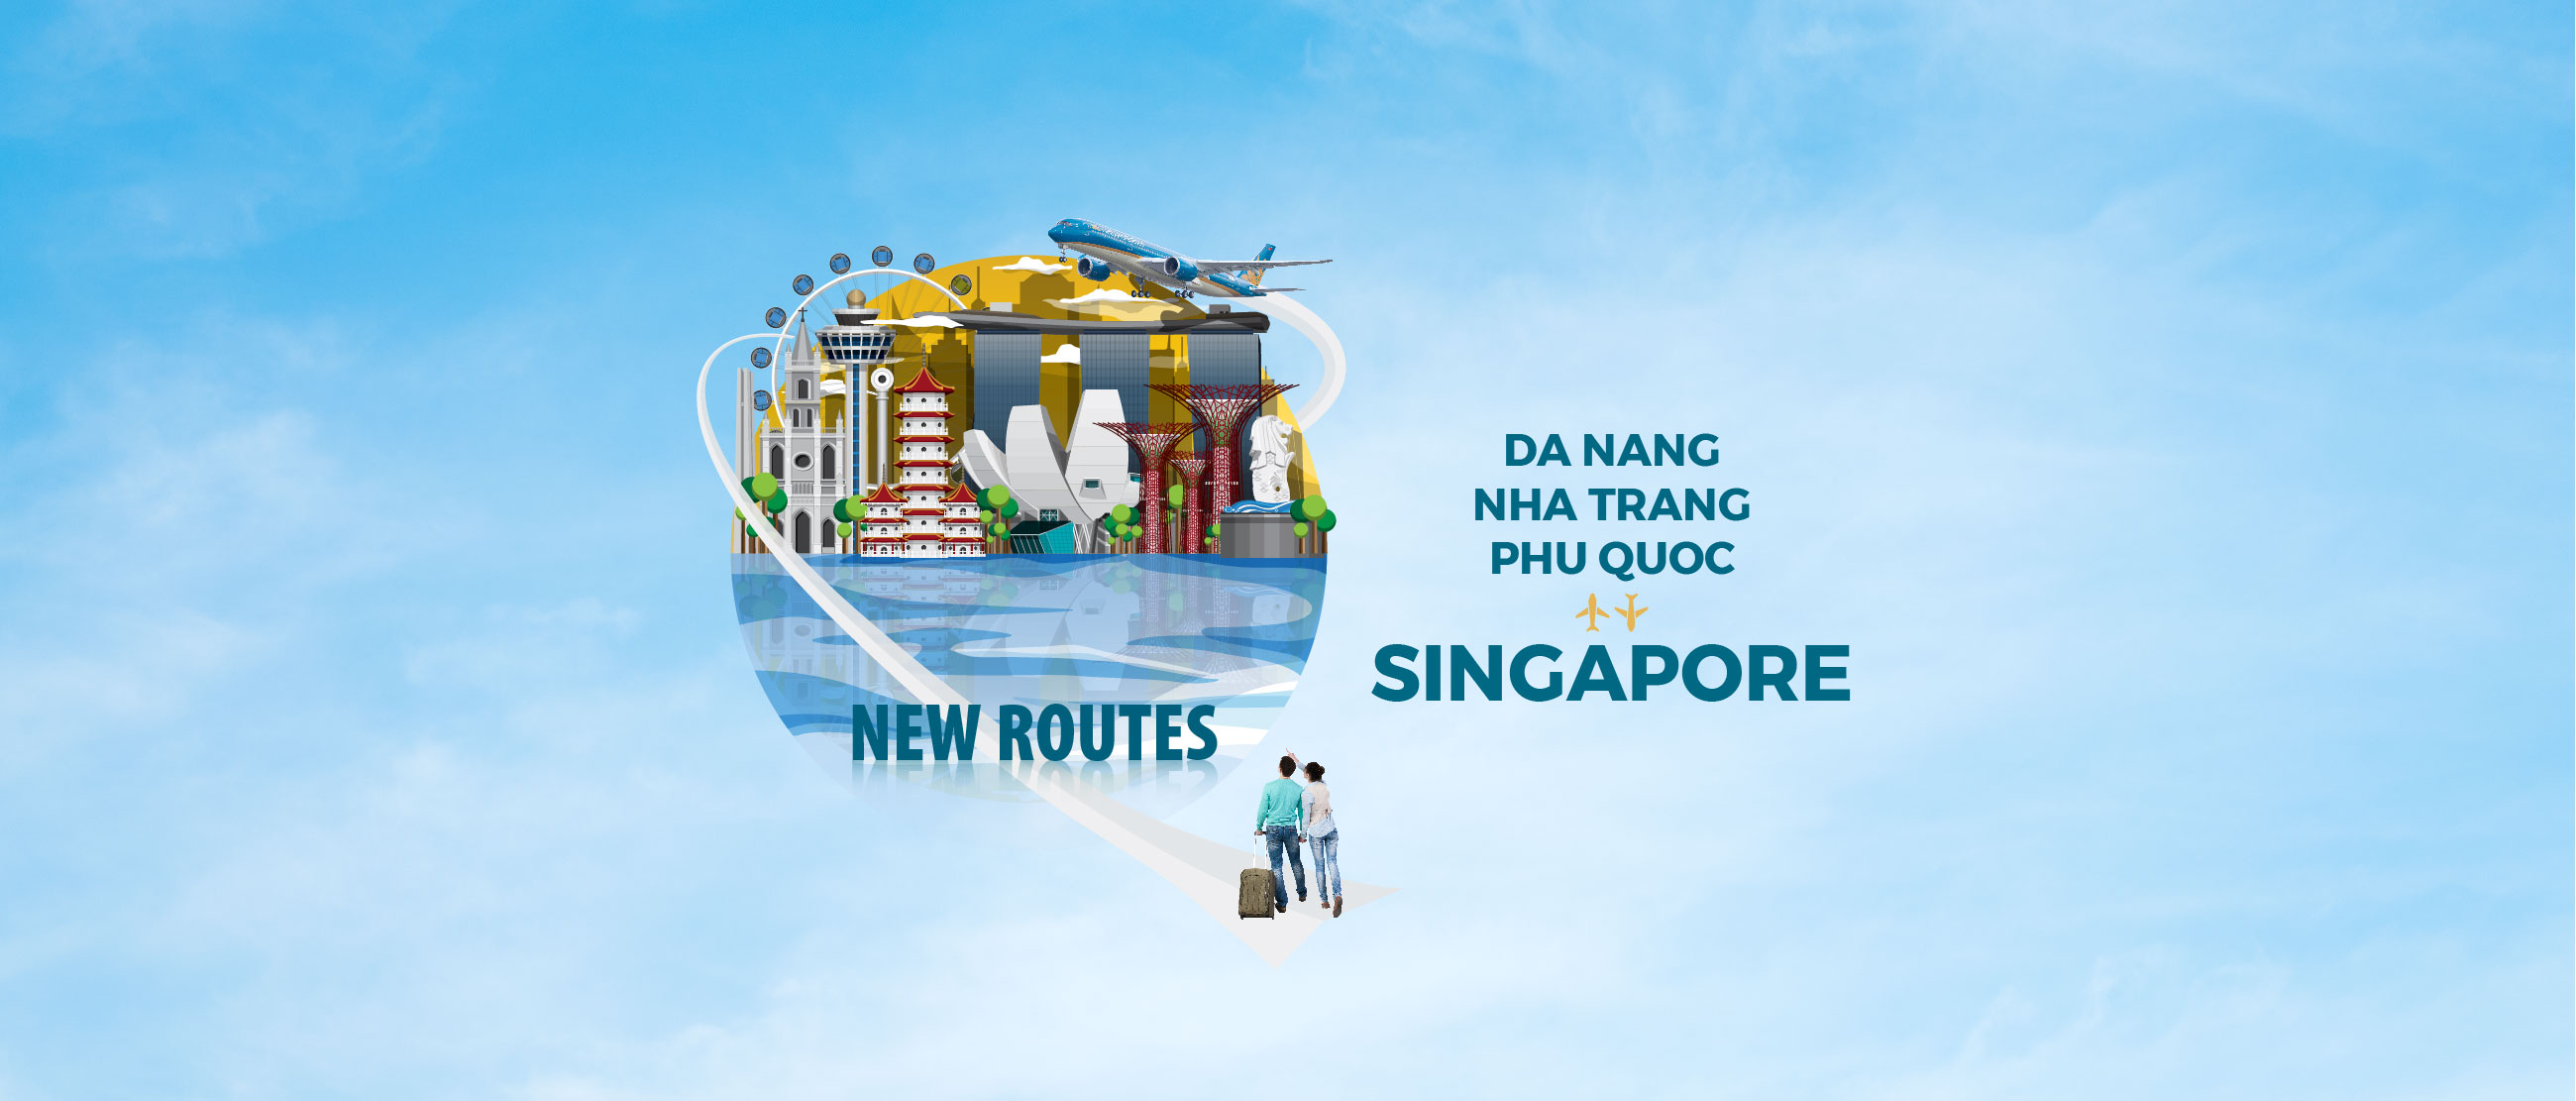 FLASH SALE UP TO 15% FOR NEW ROUTES BETWEEN VIETNAM AND SINGAPORE